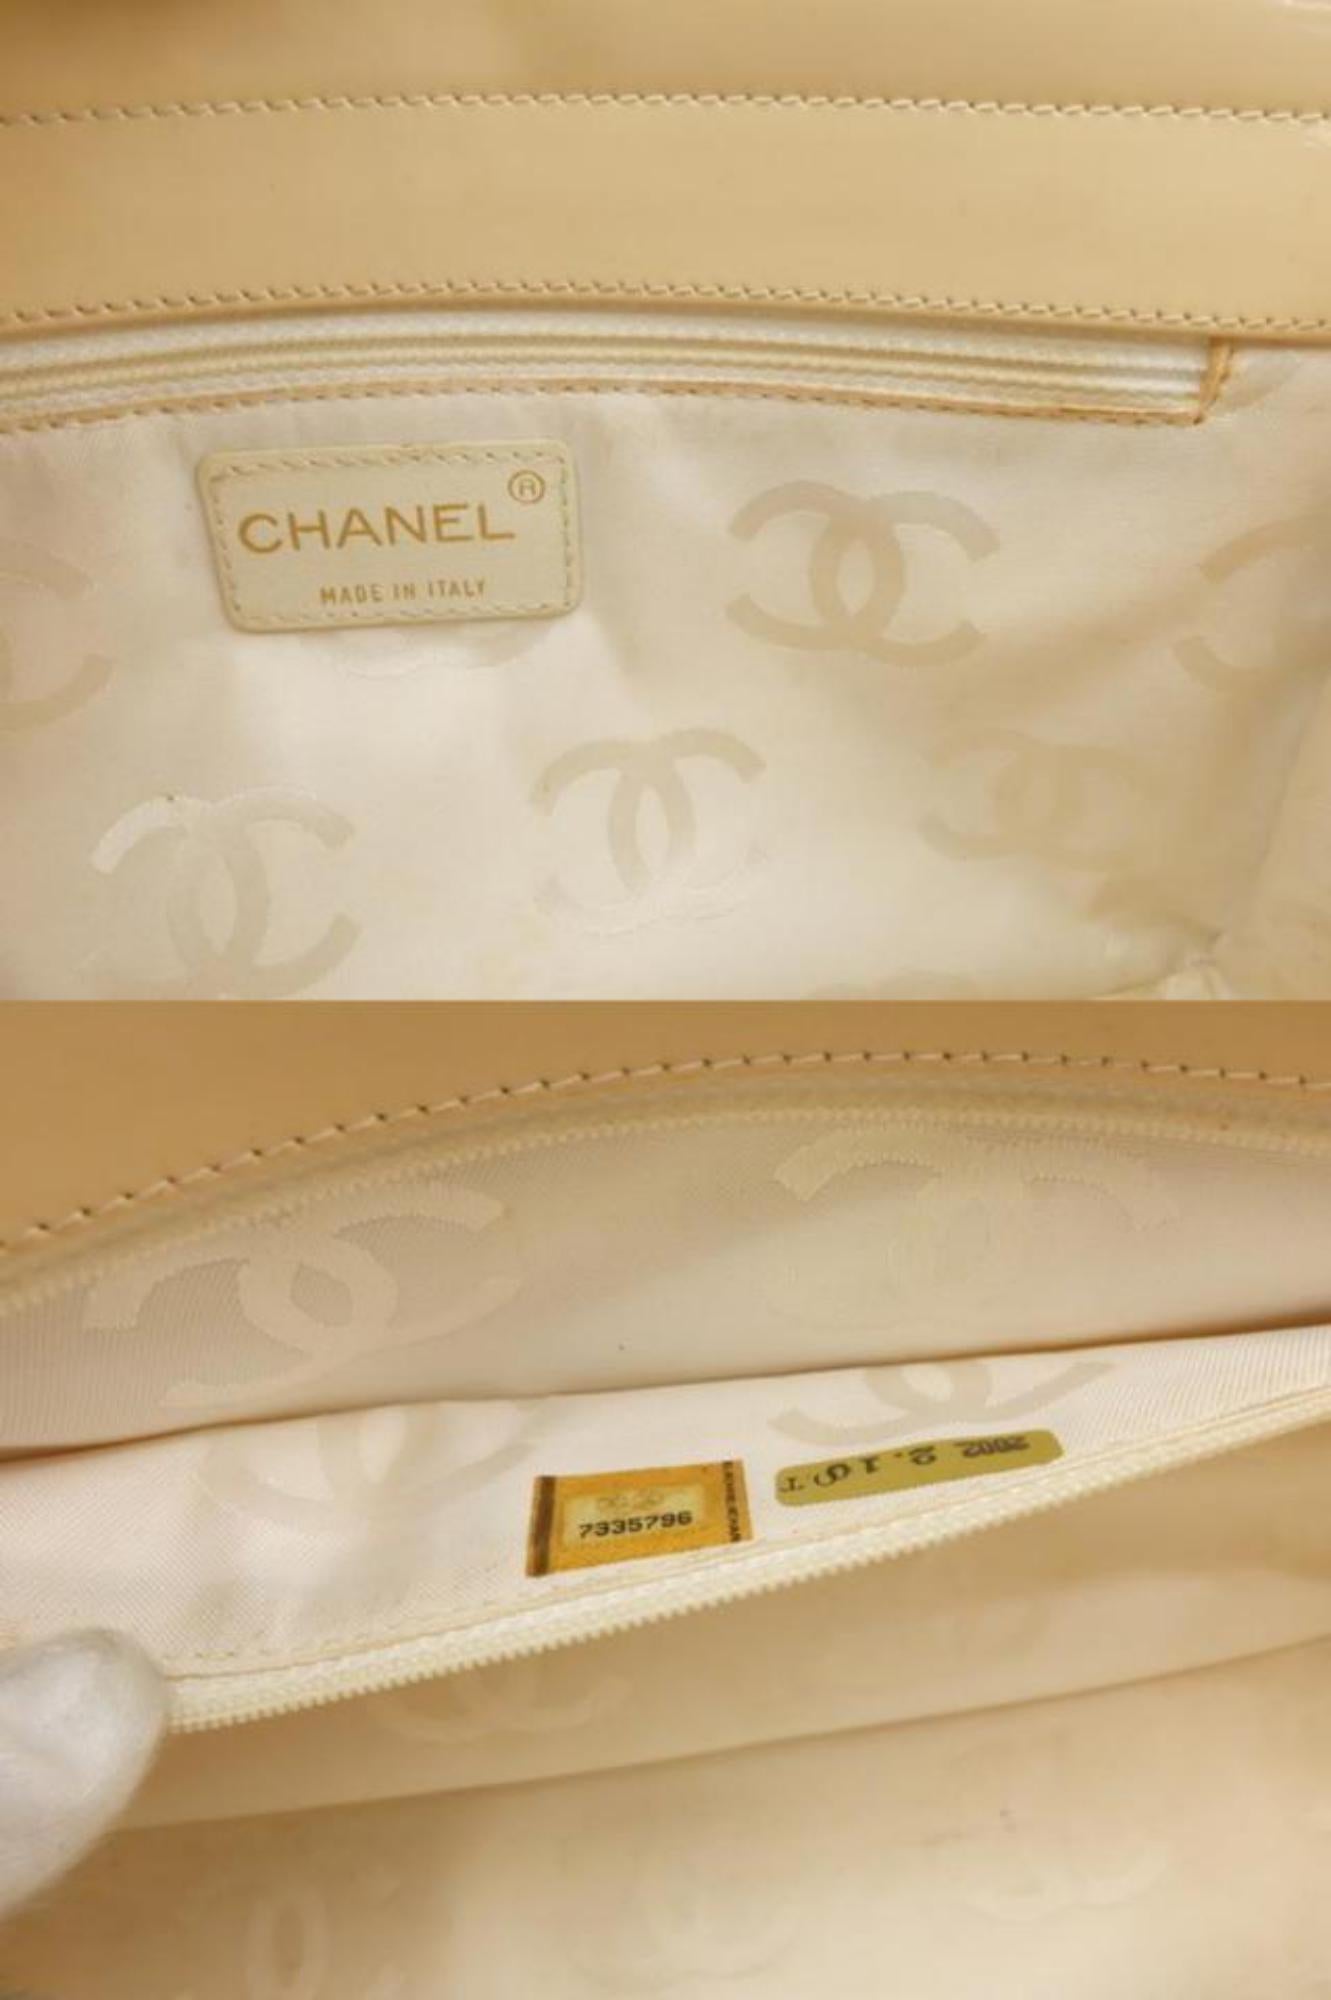 Chanel Quilted Chocolate Bar Chain 231369 Ivory Patent Leather Tote In Good Condition For Sale In Forest Hills, NY